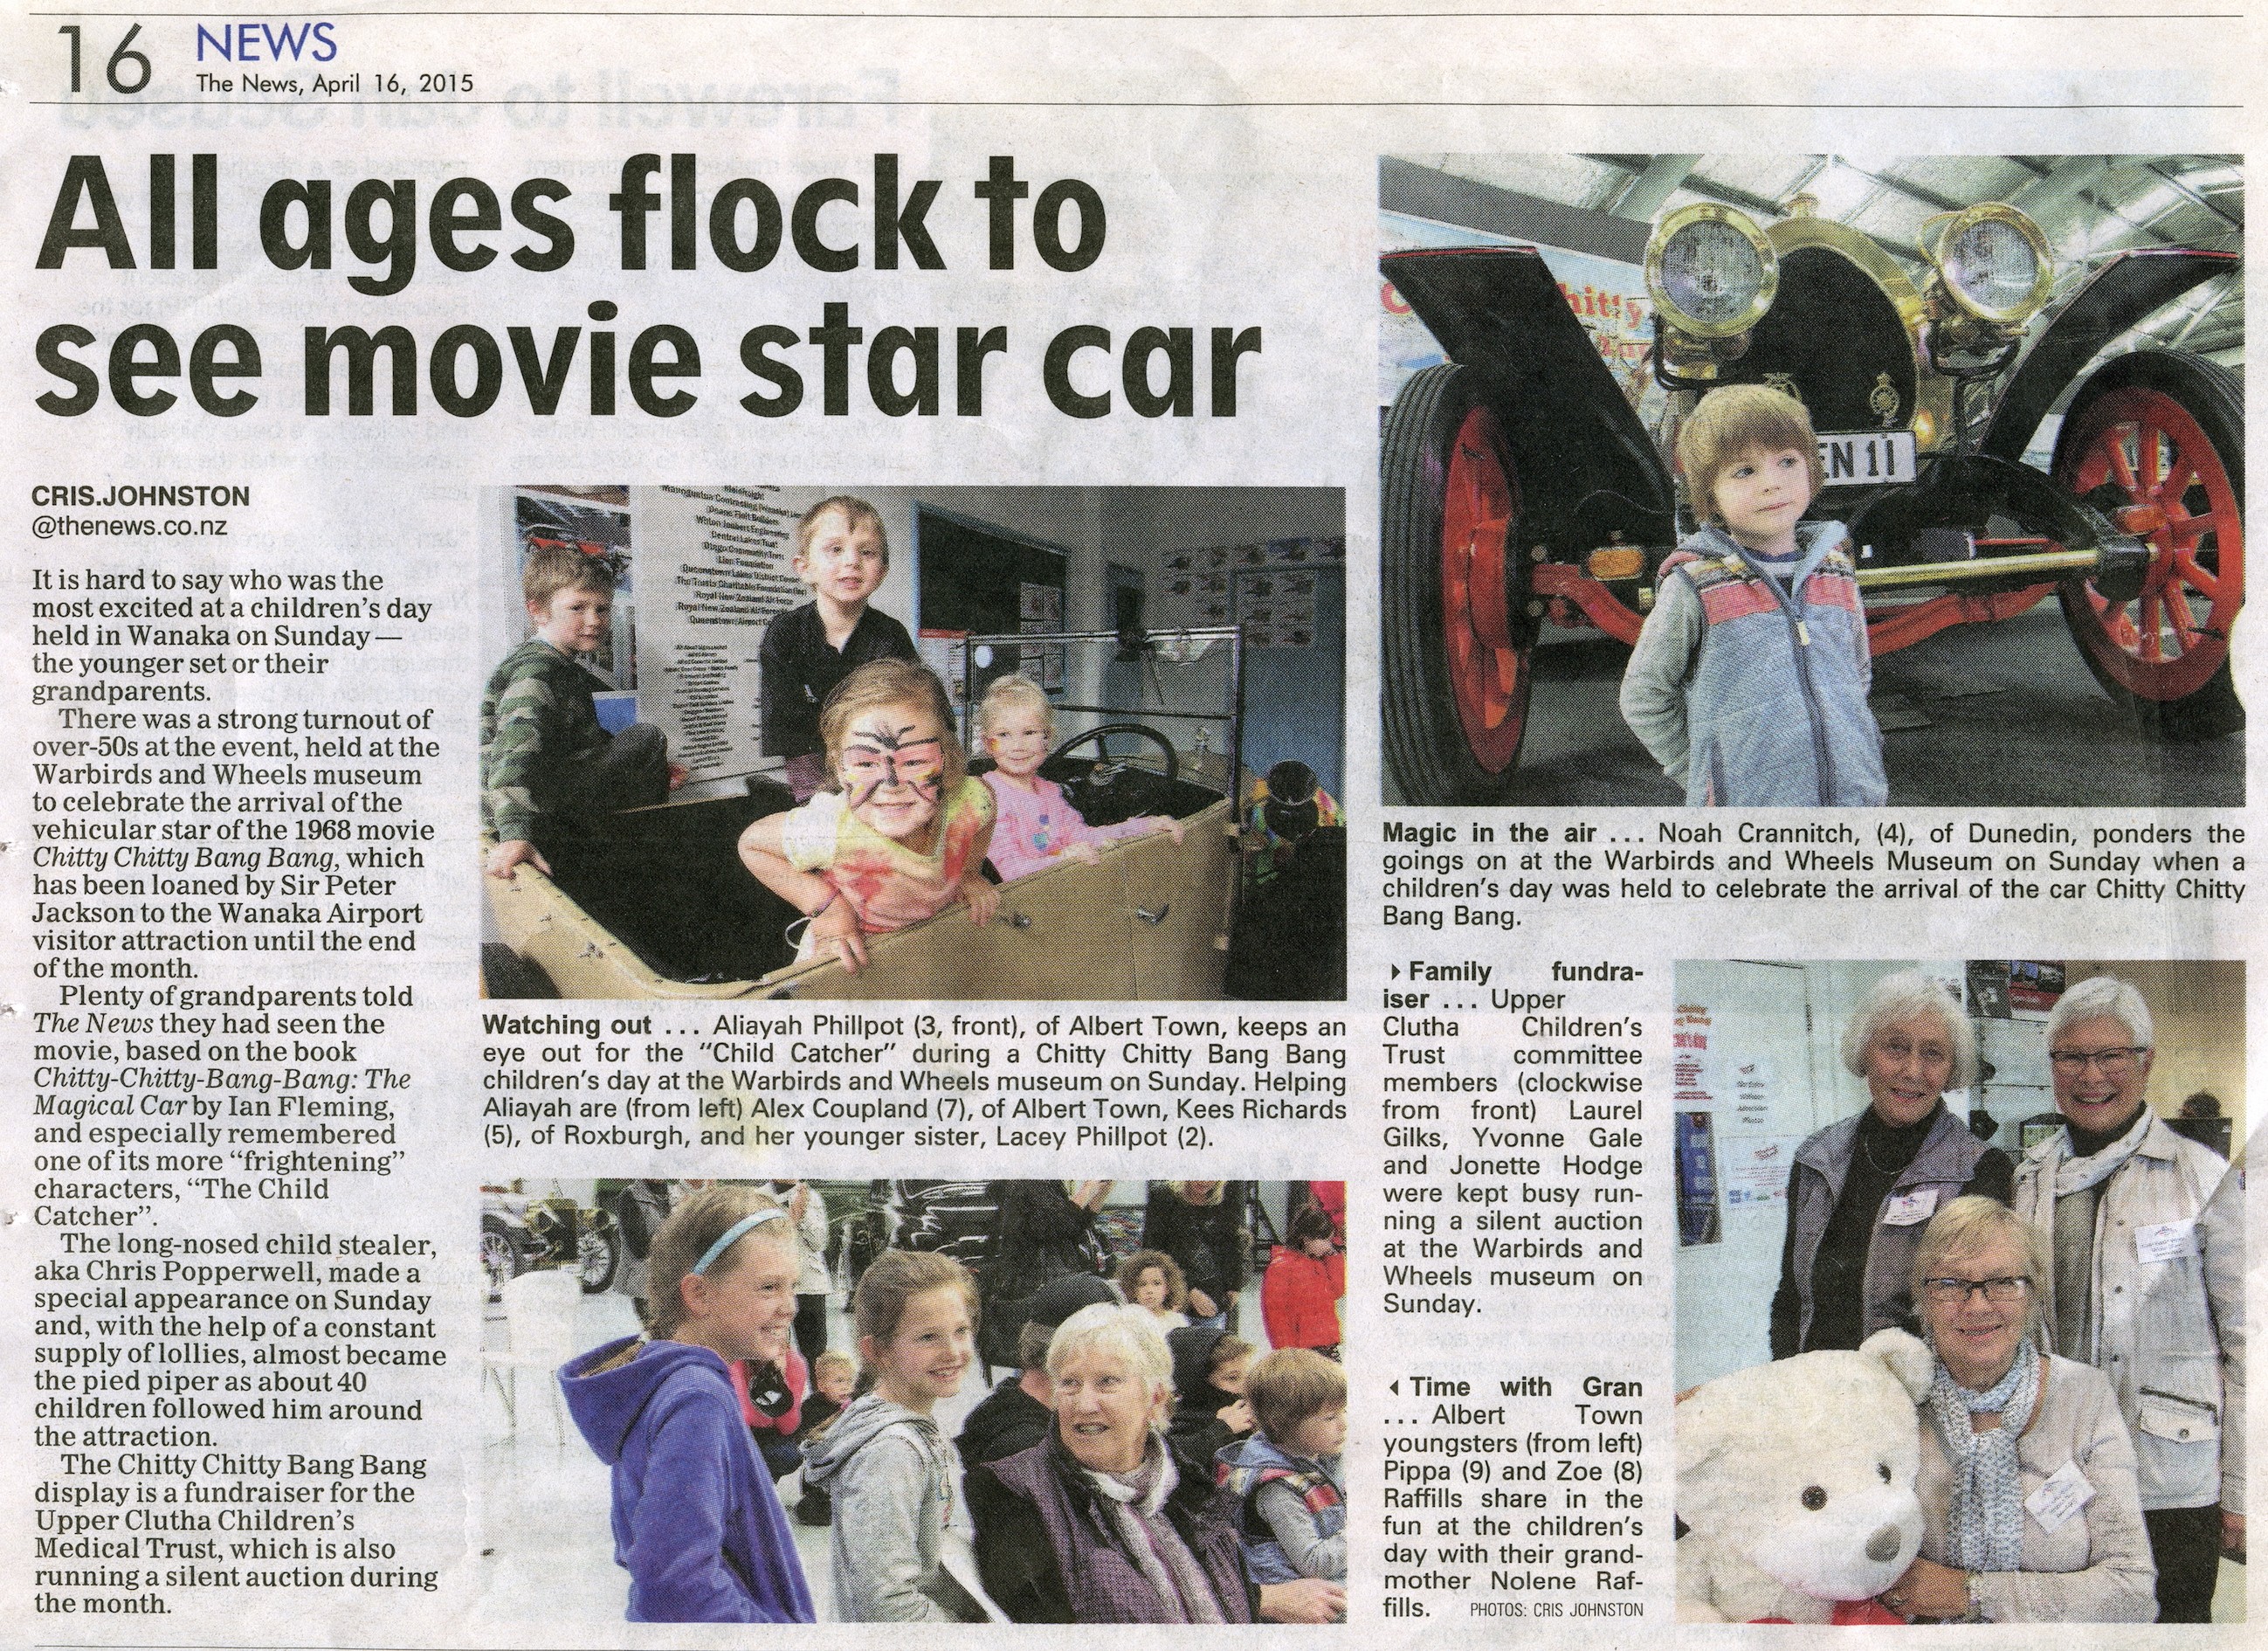 Newspaper story on the contribution to and benefit from the Warbirds and Wheels Chitty Chitty Bang Bang Event